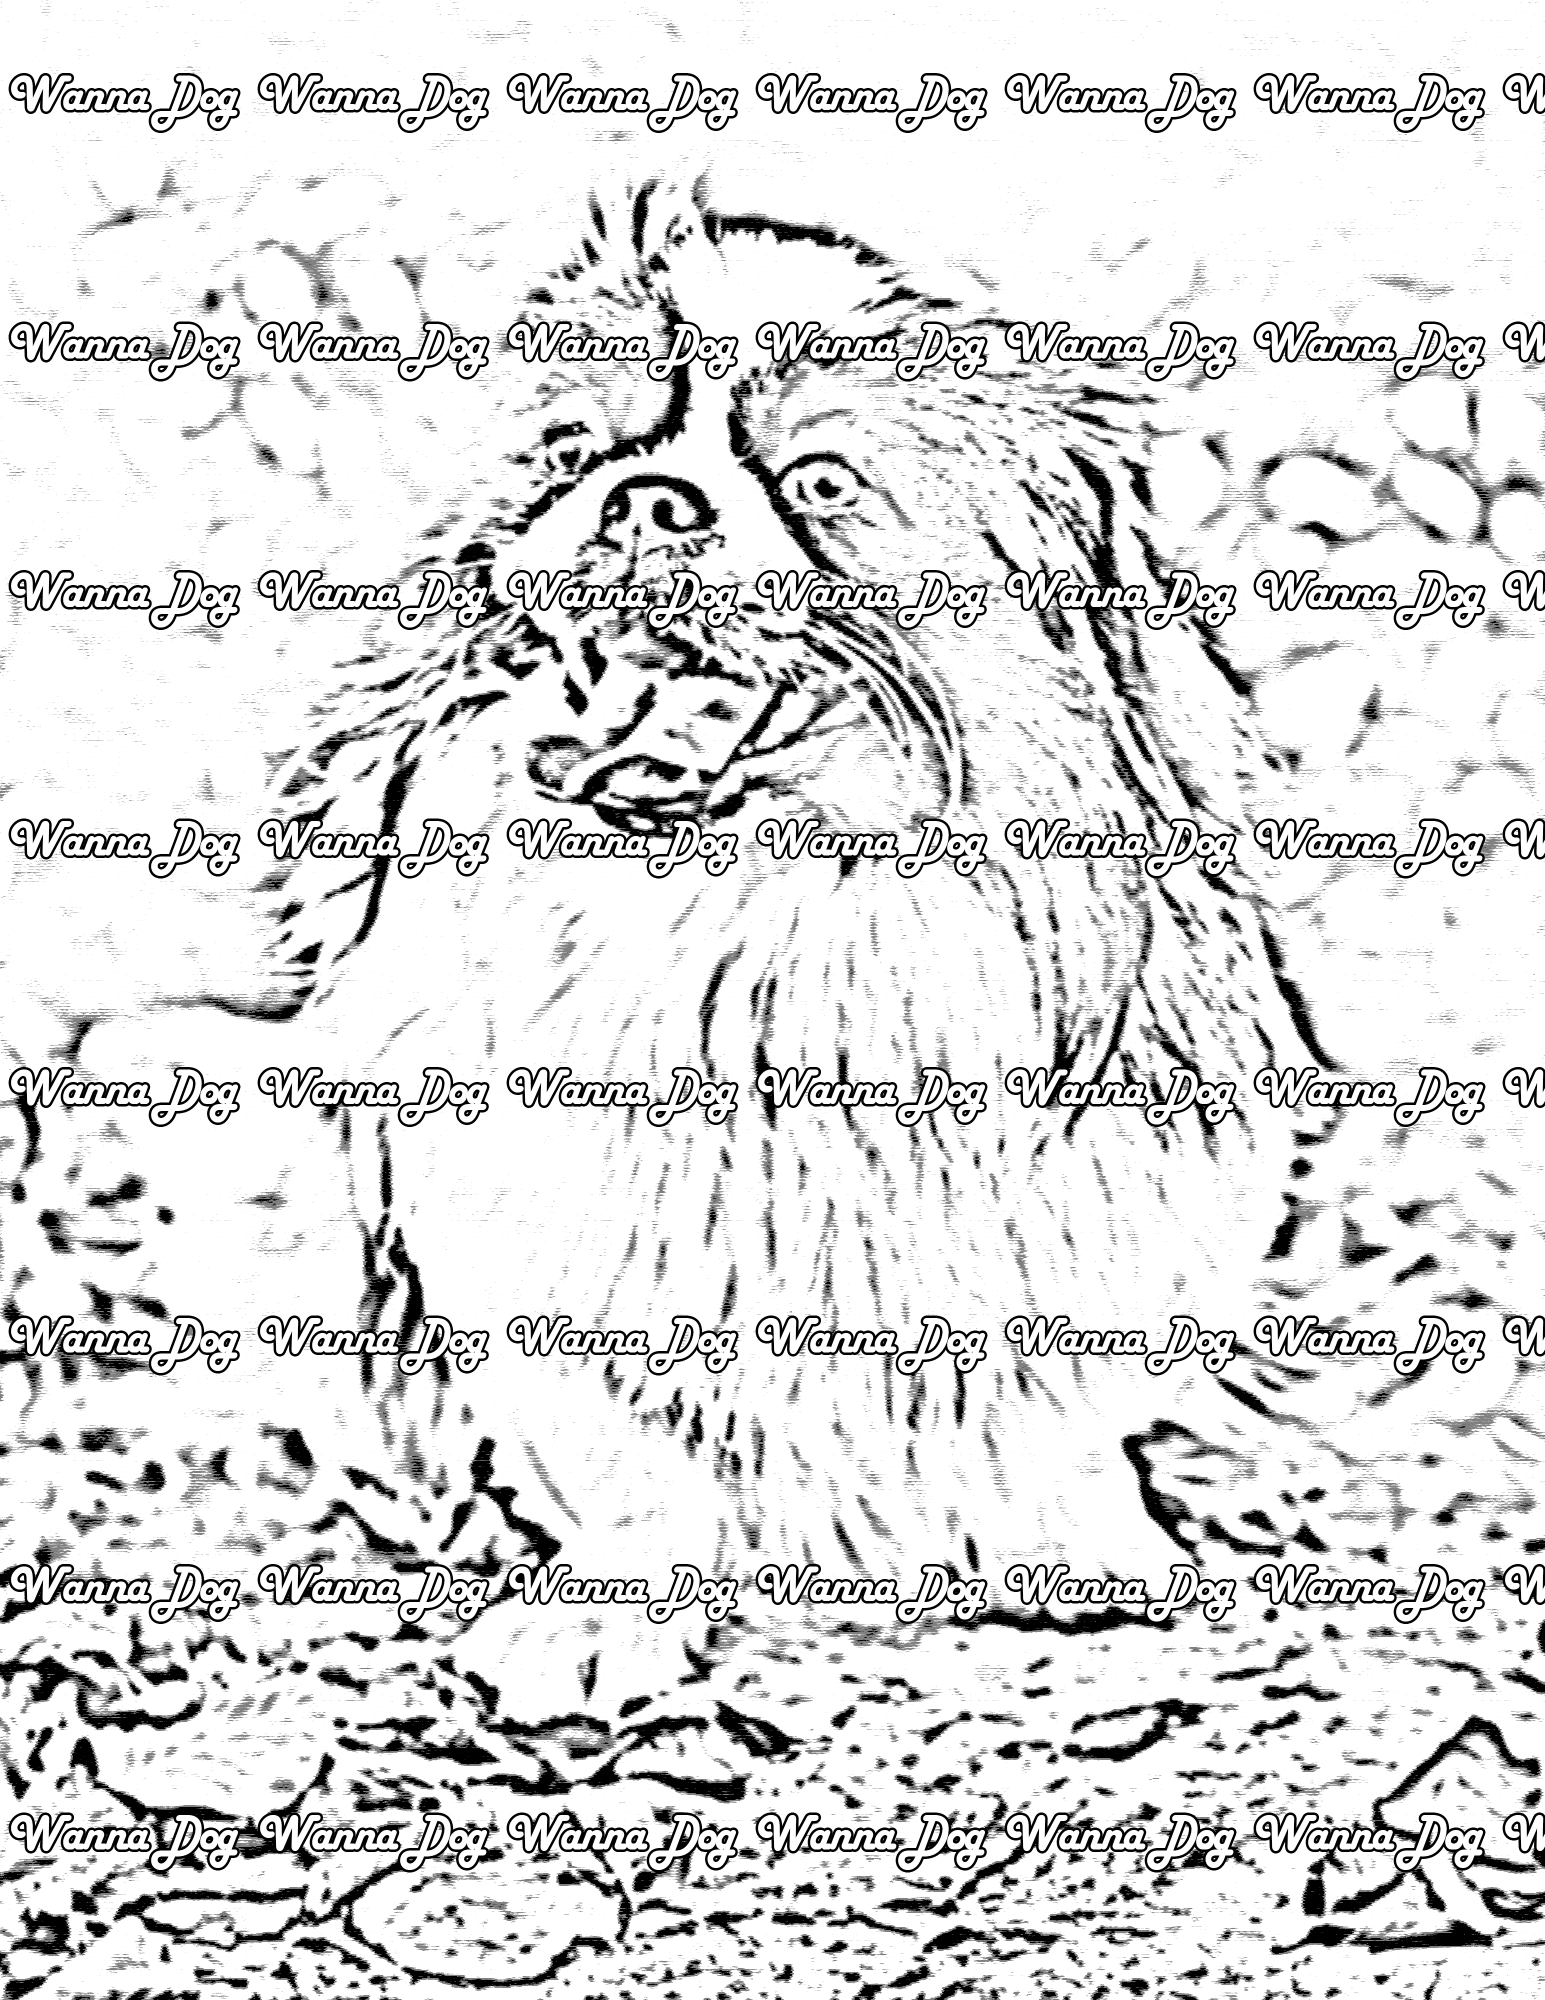 Pekingese Coloring Page of a Pekingese sitting in a park